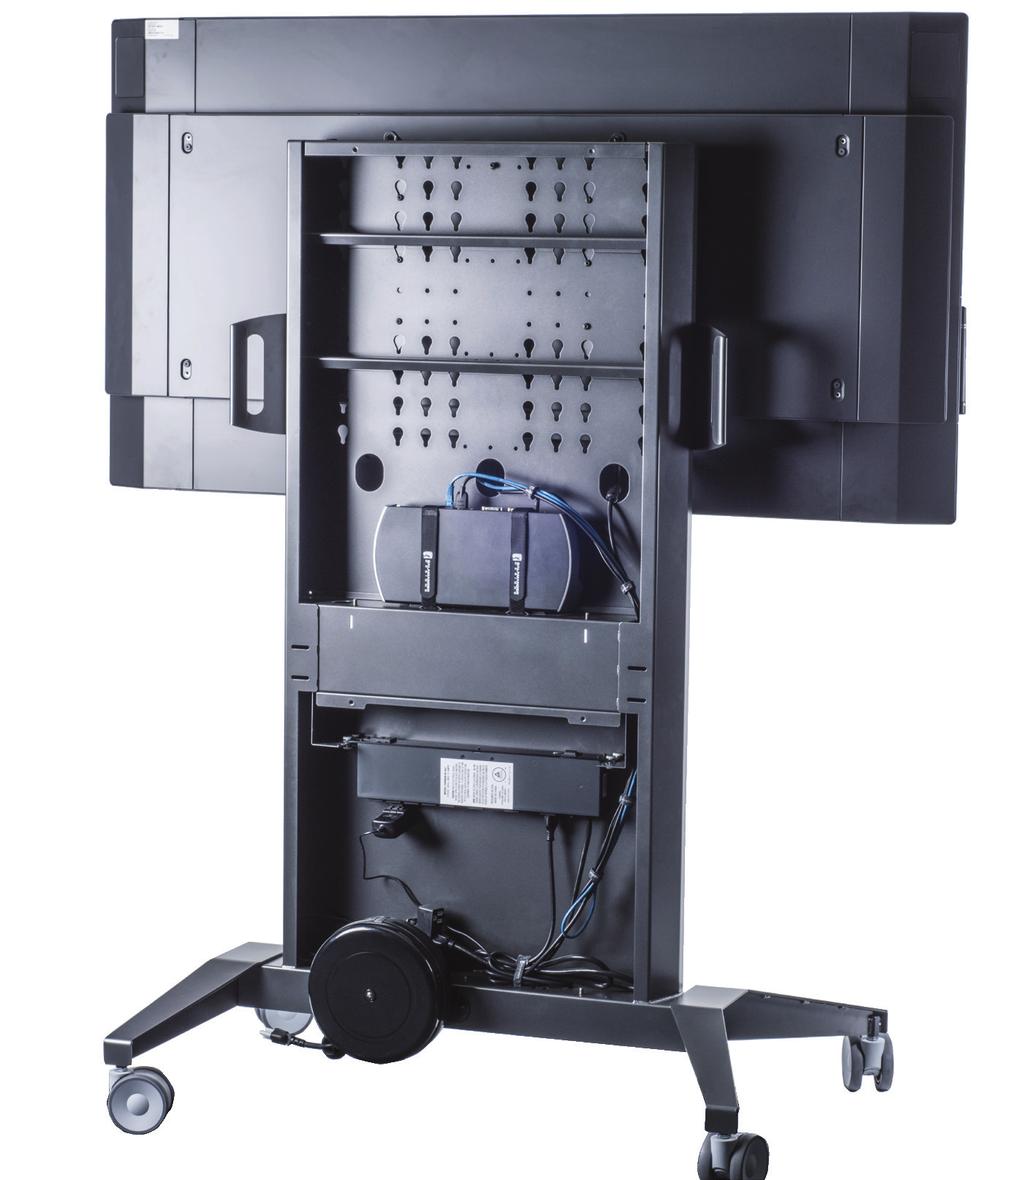 Adjustable Height Position set during assembly Secure Rear Panels allow for easy access to